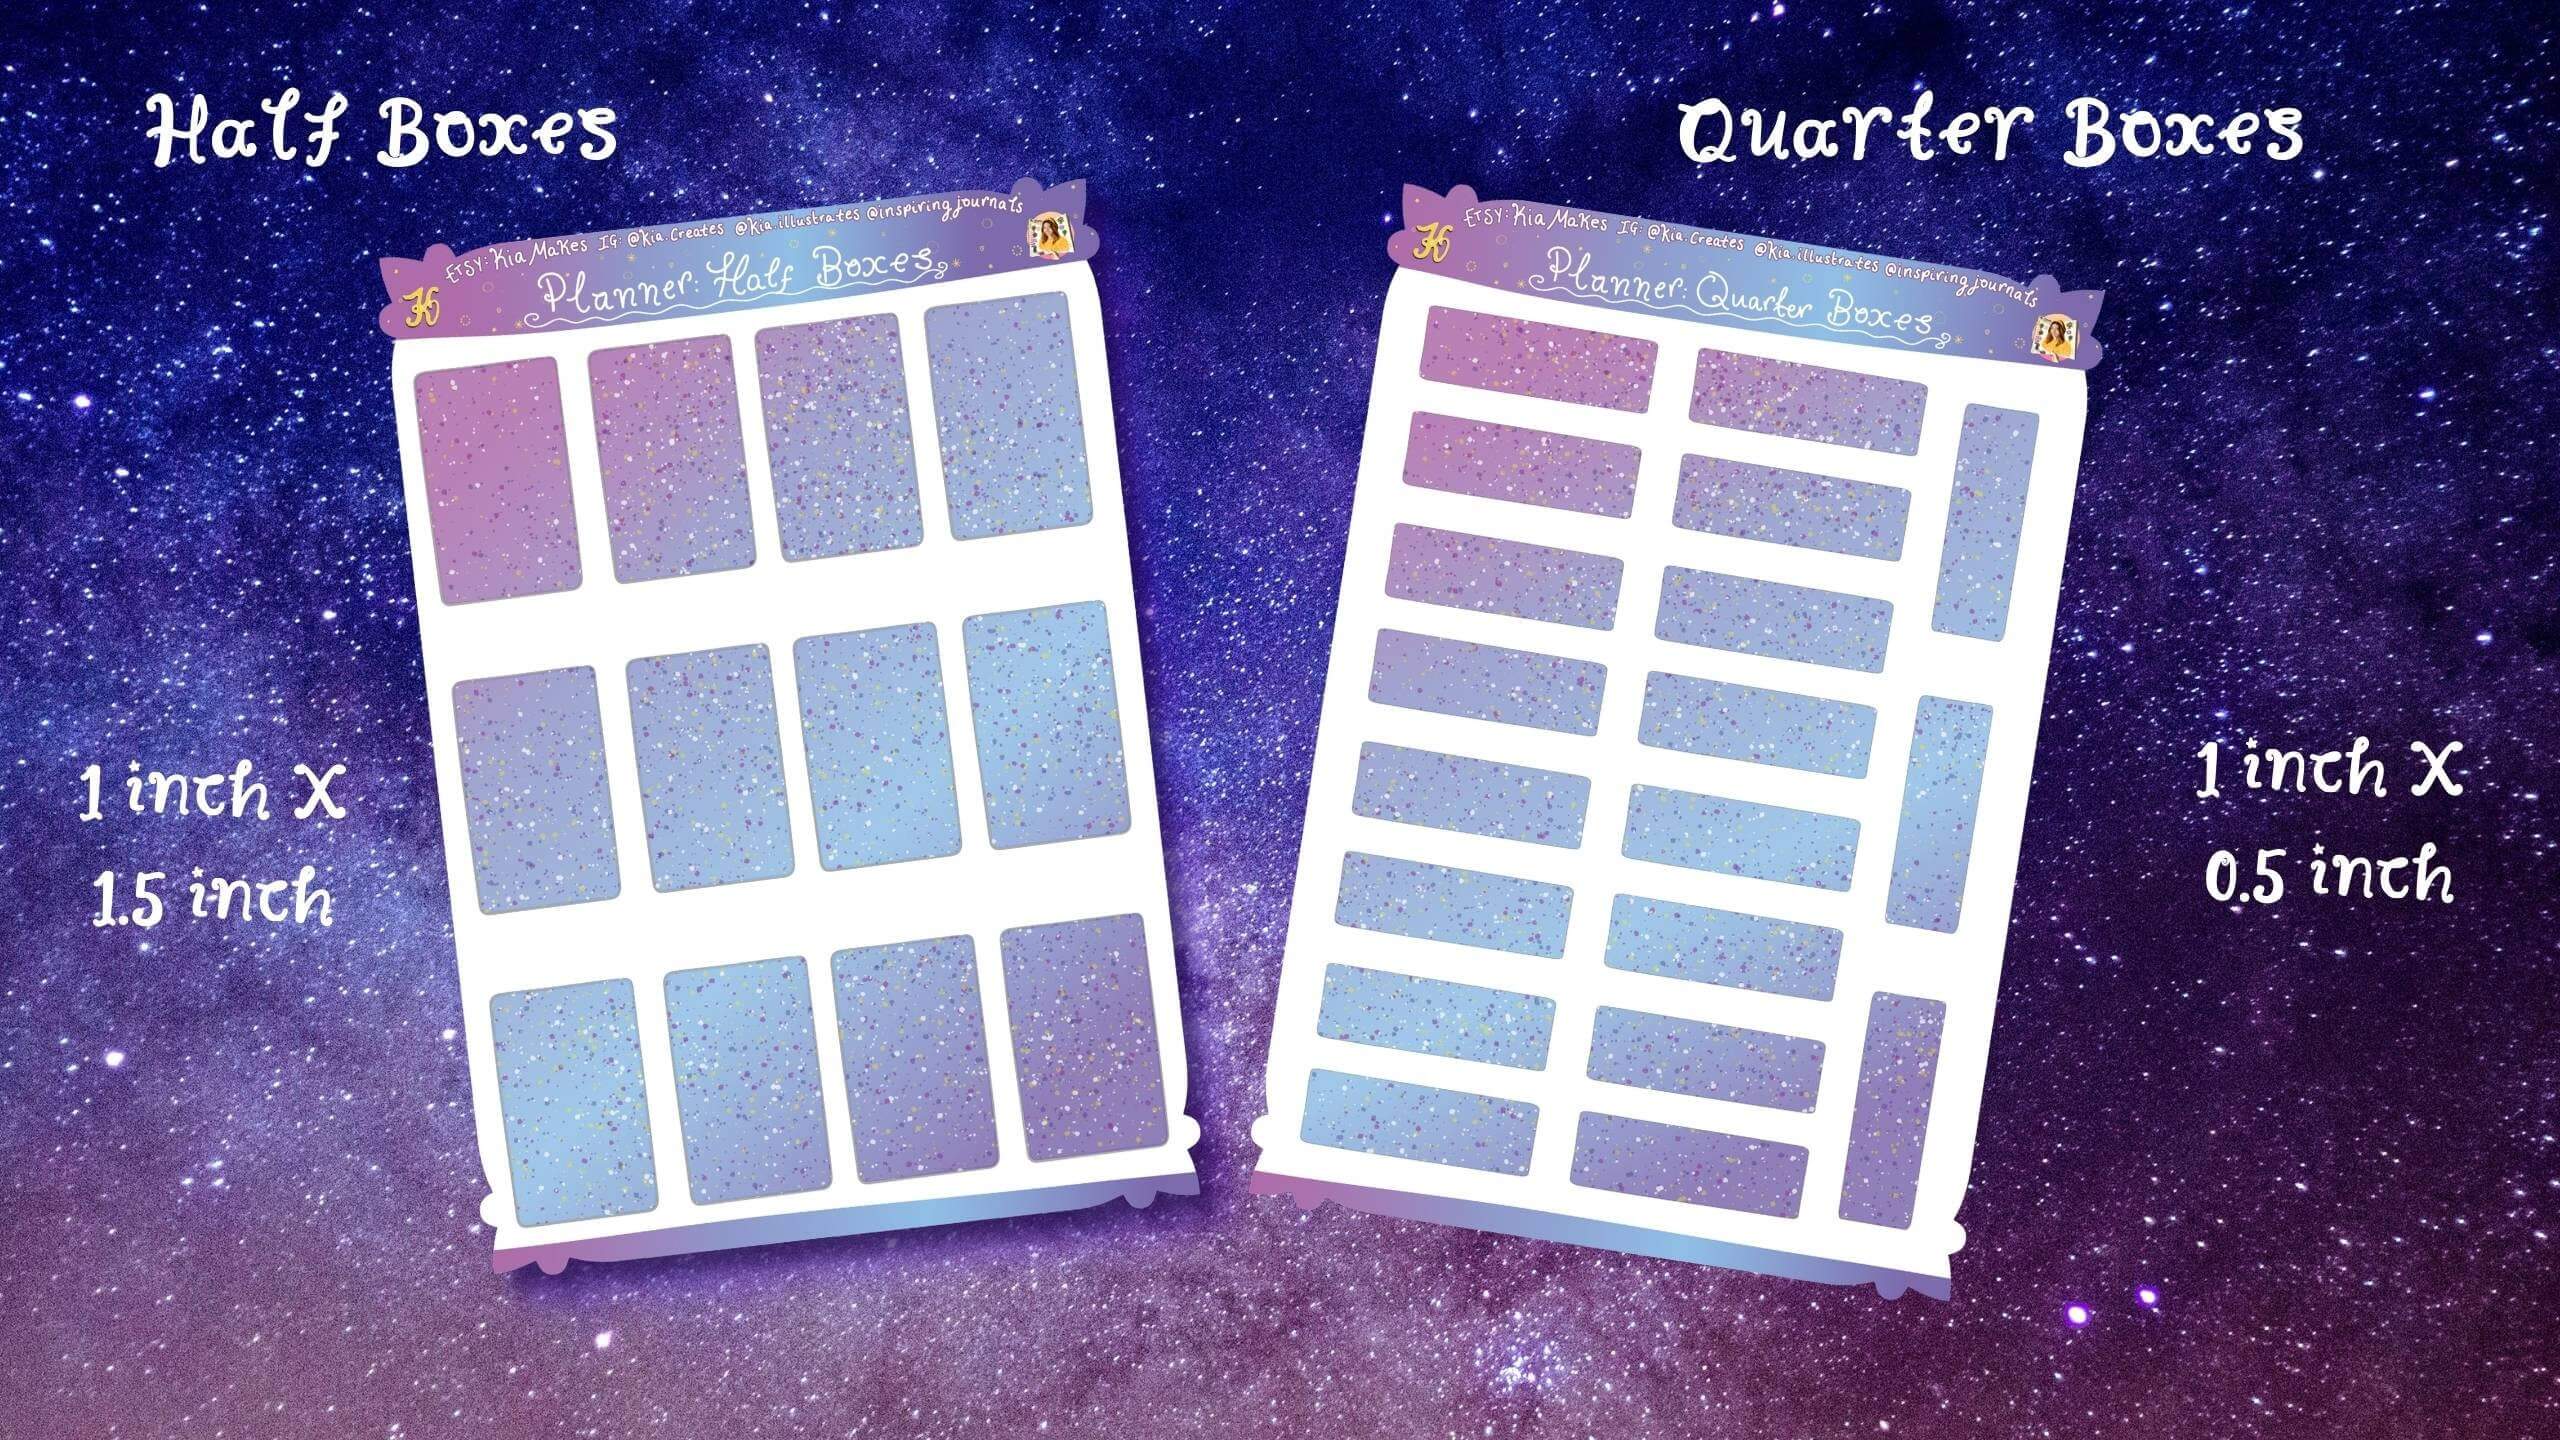 Planner stickers bundle - Galaxy purple - half boxes and quarter boxes